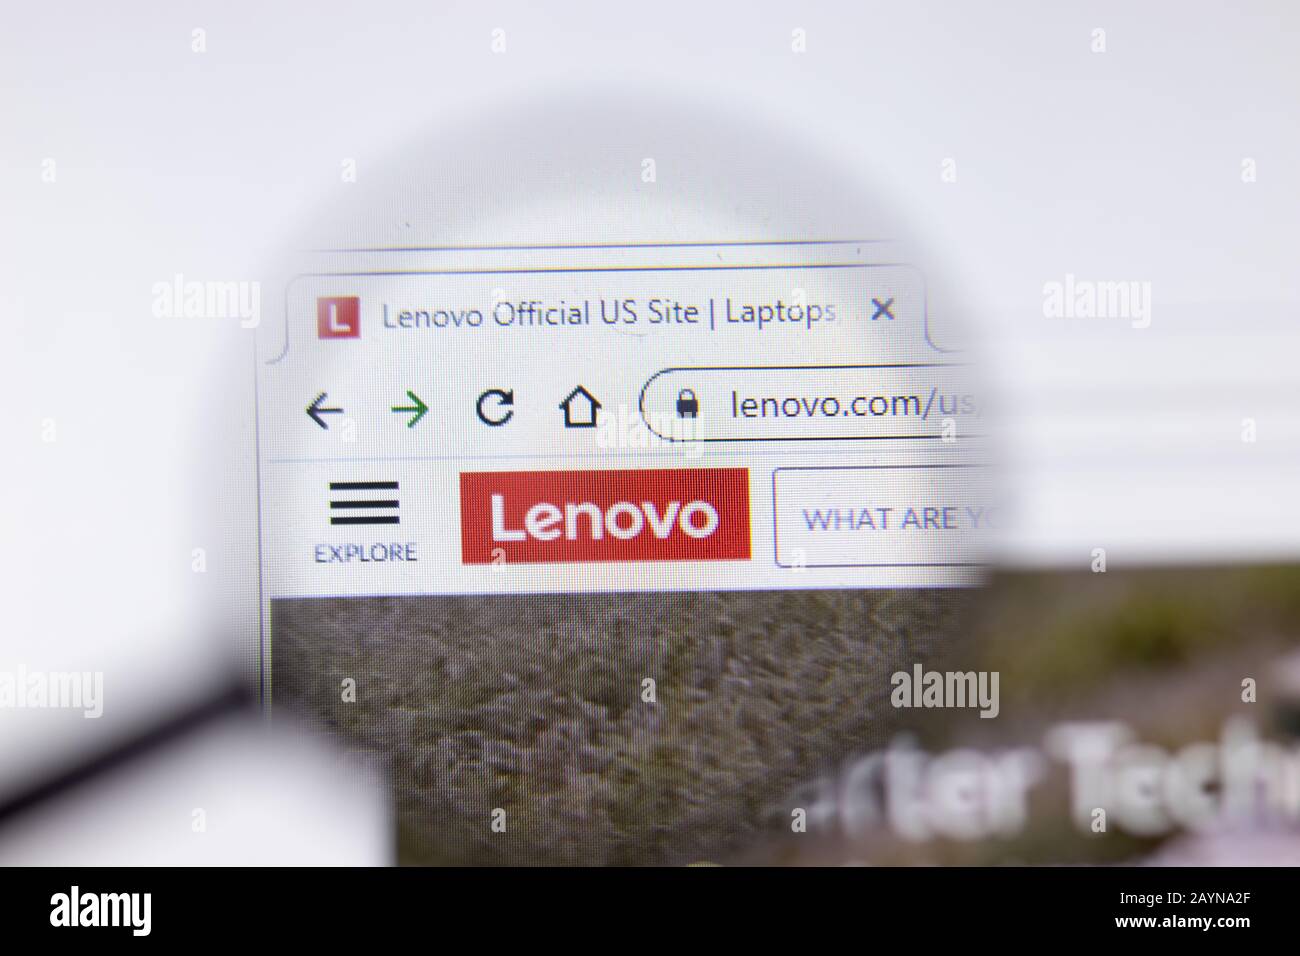 Saint-Petersburg, Russia - 18 February 2020: Lenovo company website page logo on laptop display. Screen with icon, Illustrative Editorial Stock Photo